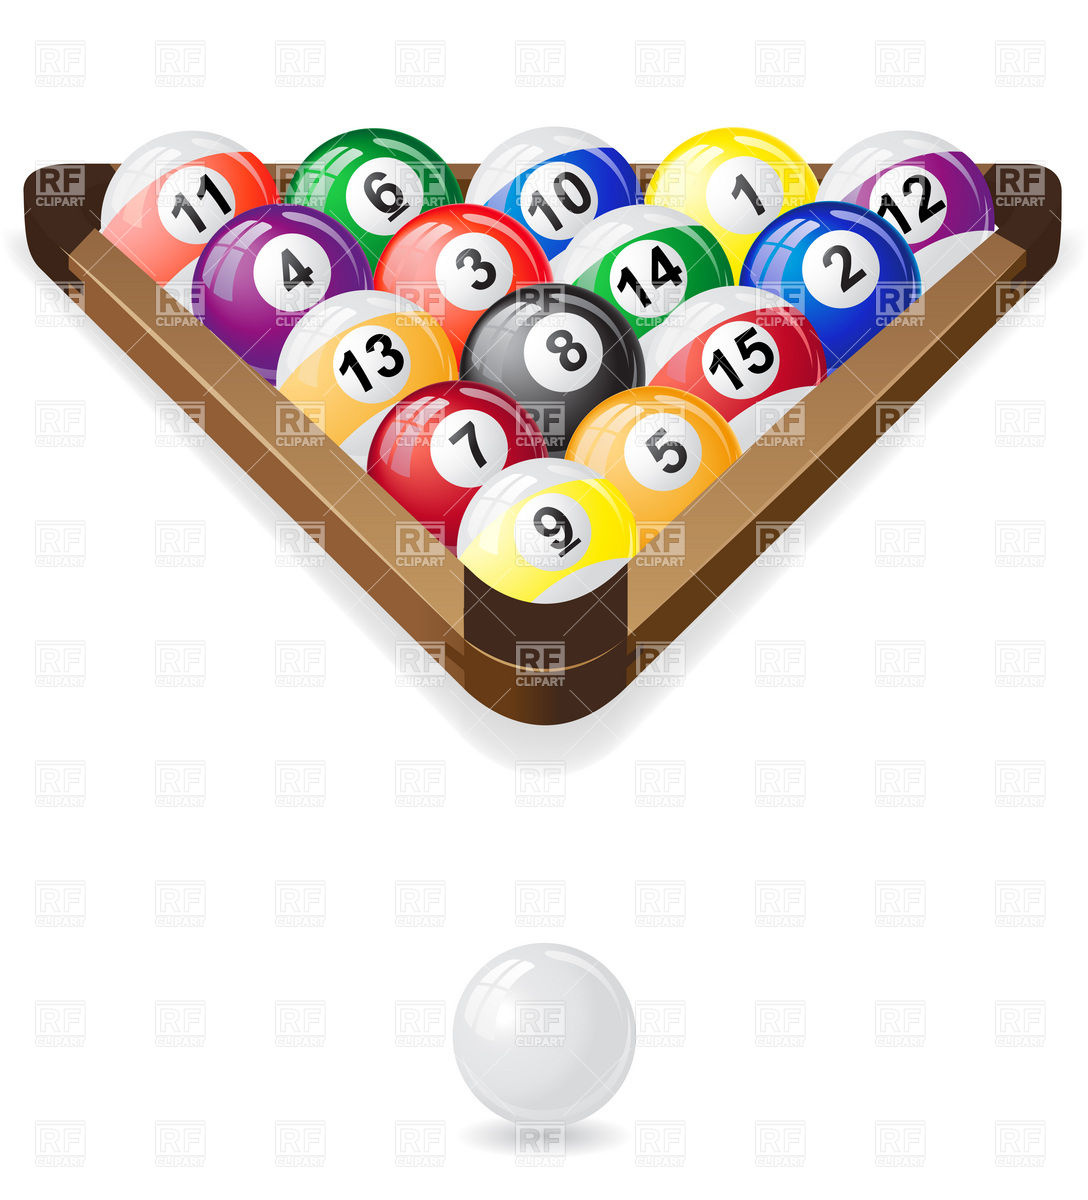 Three Cornered Snooker Rack Setup With Balls 19146 Objects Download